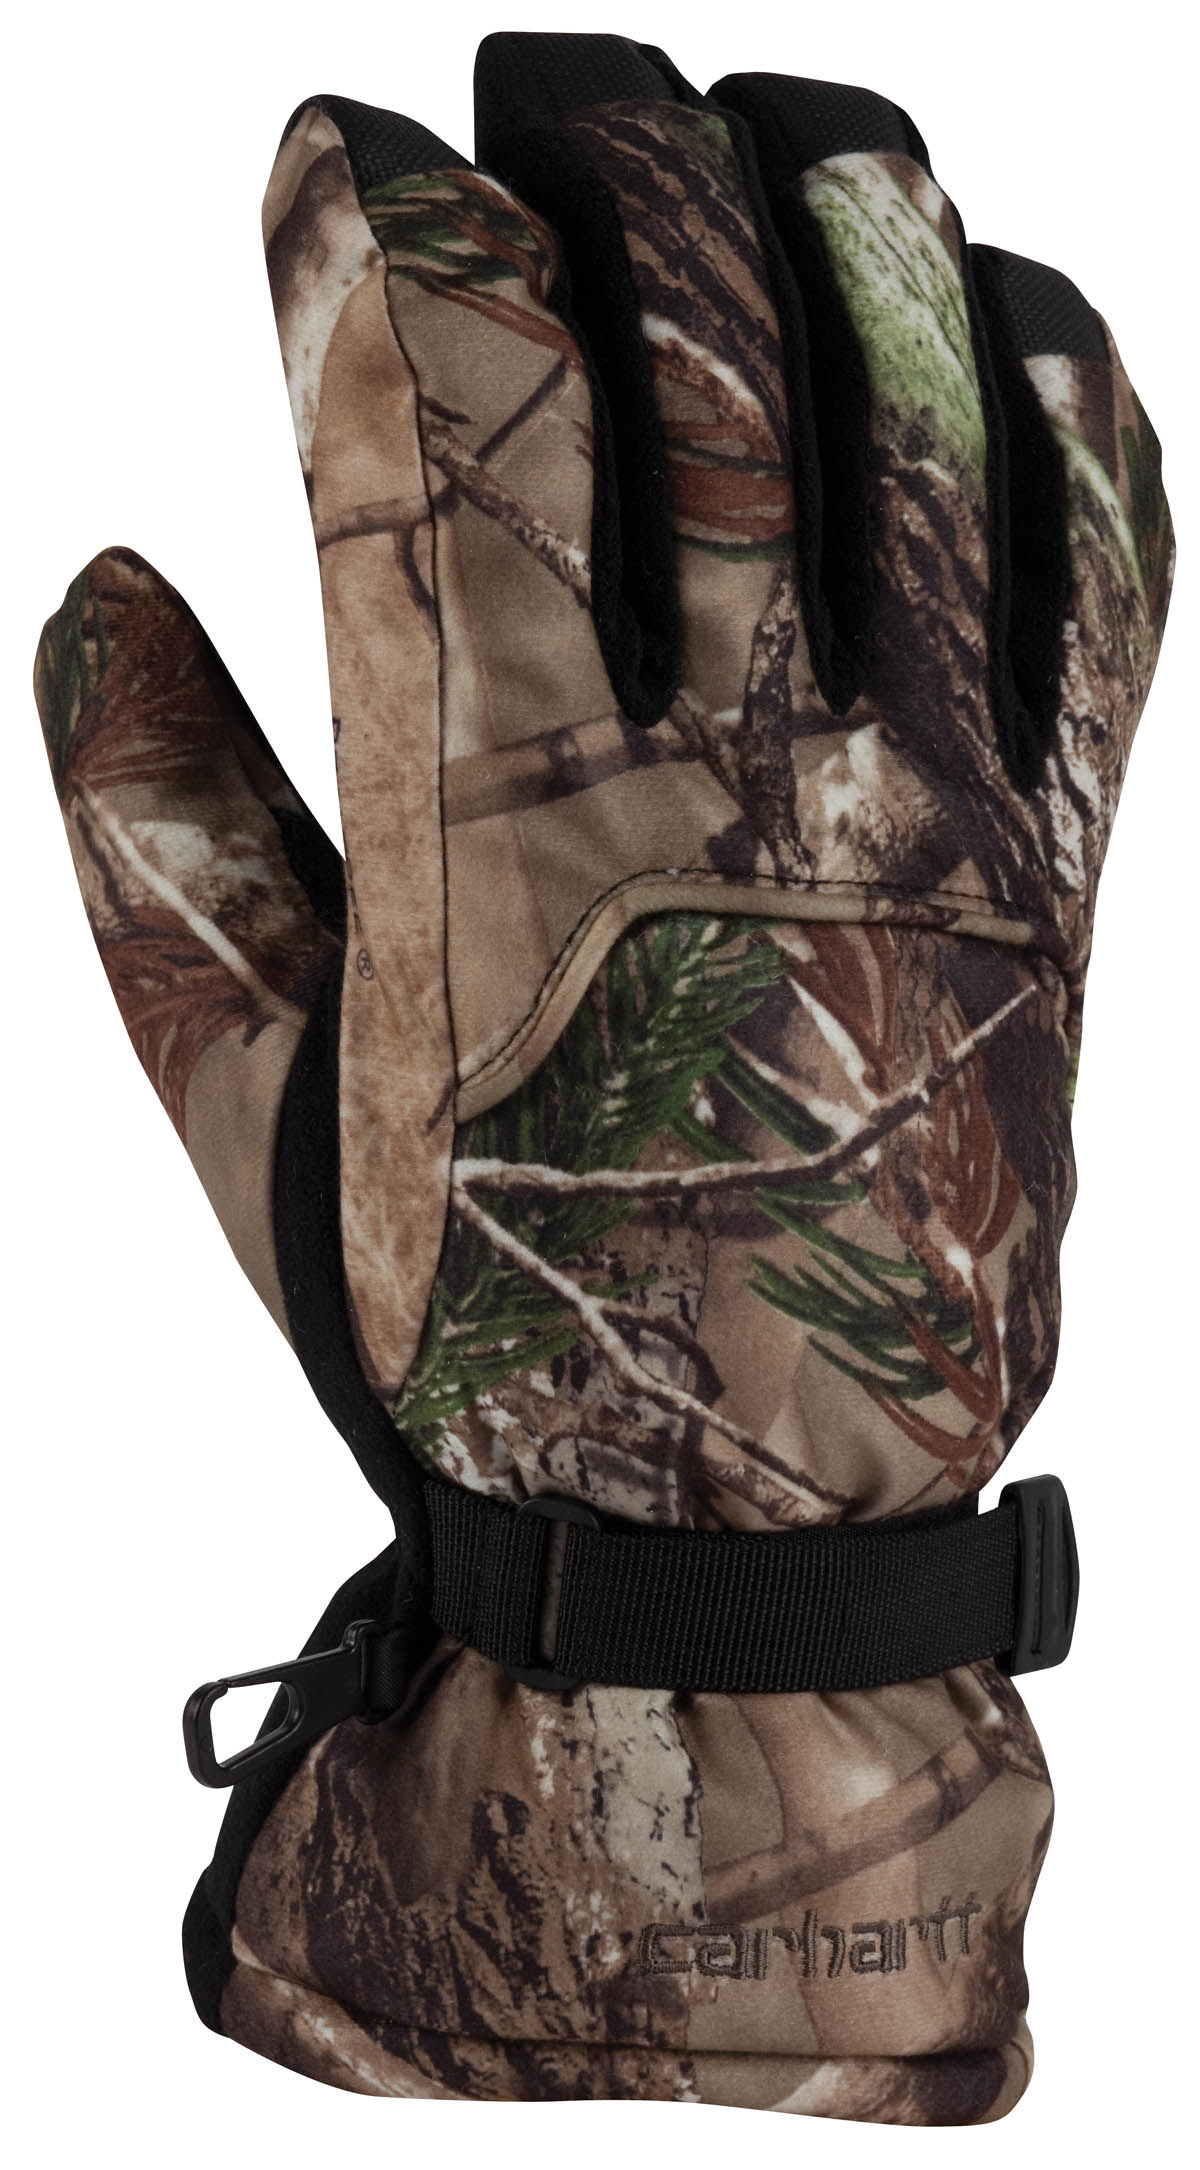 Carhartt Mens TS Gauntlet Glove Discontinued Pricing